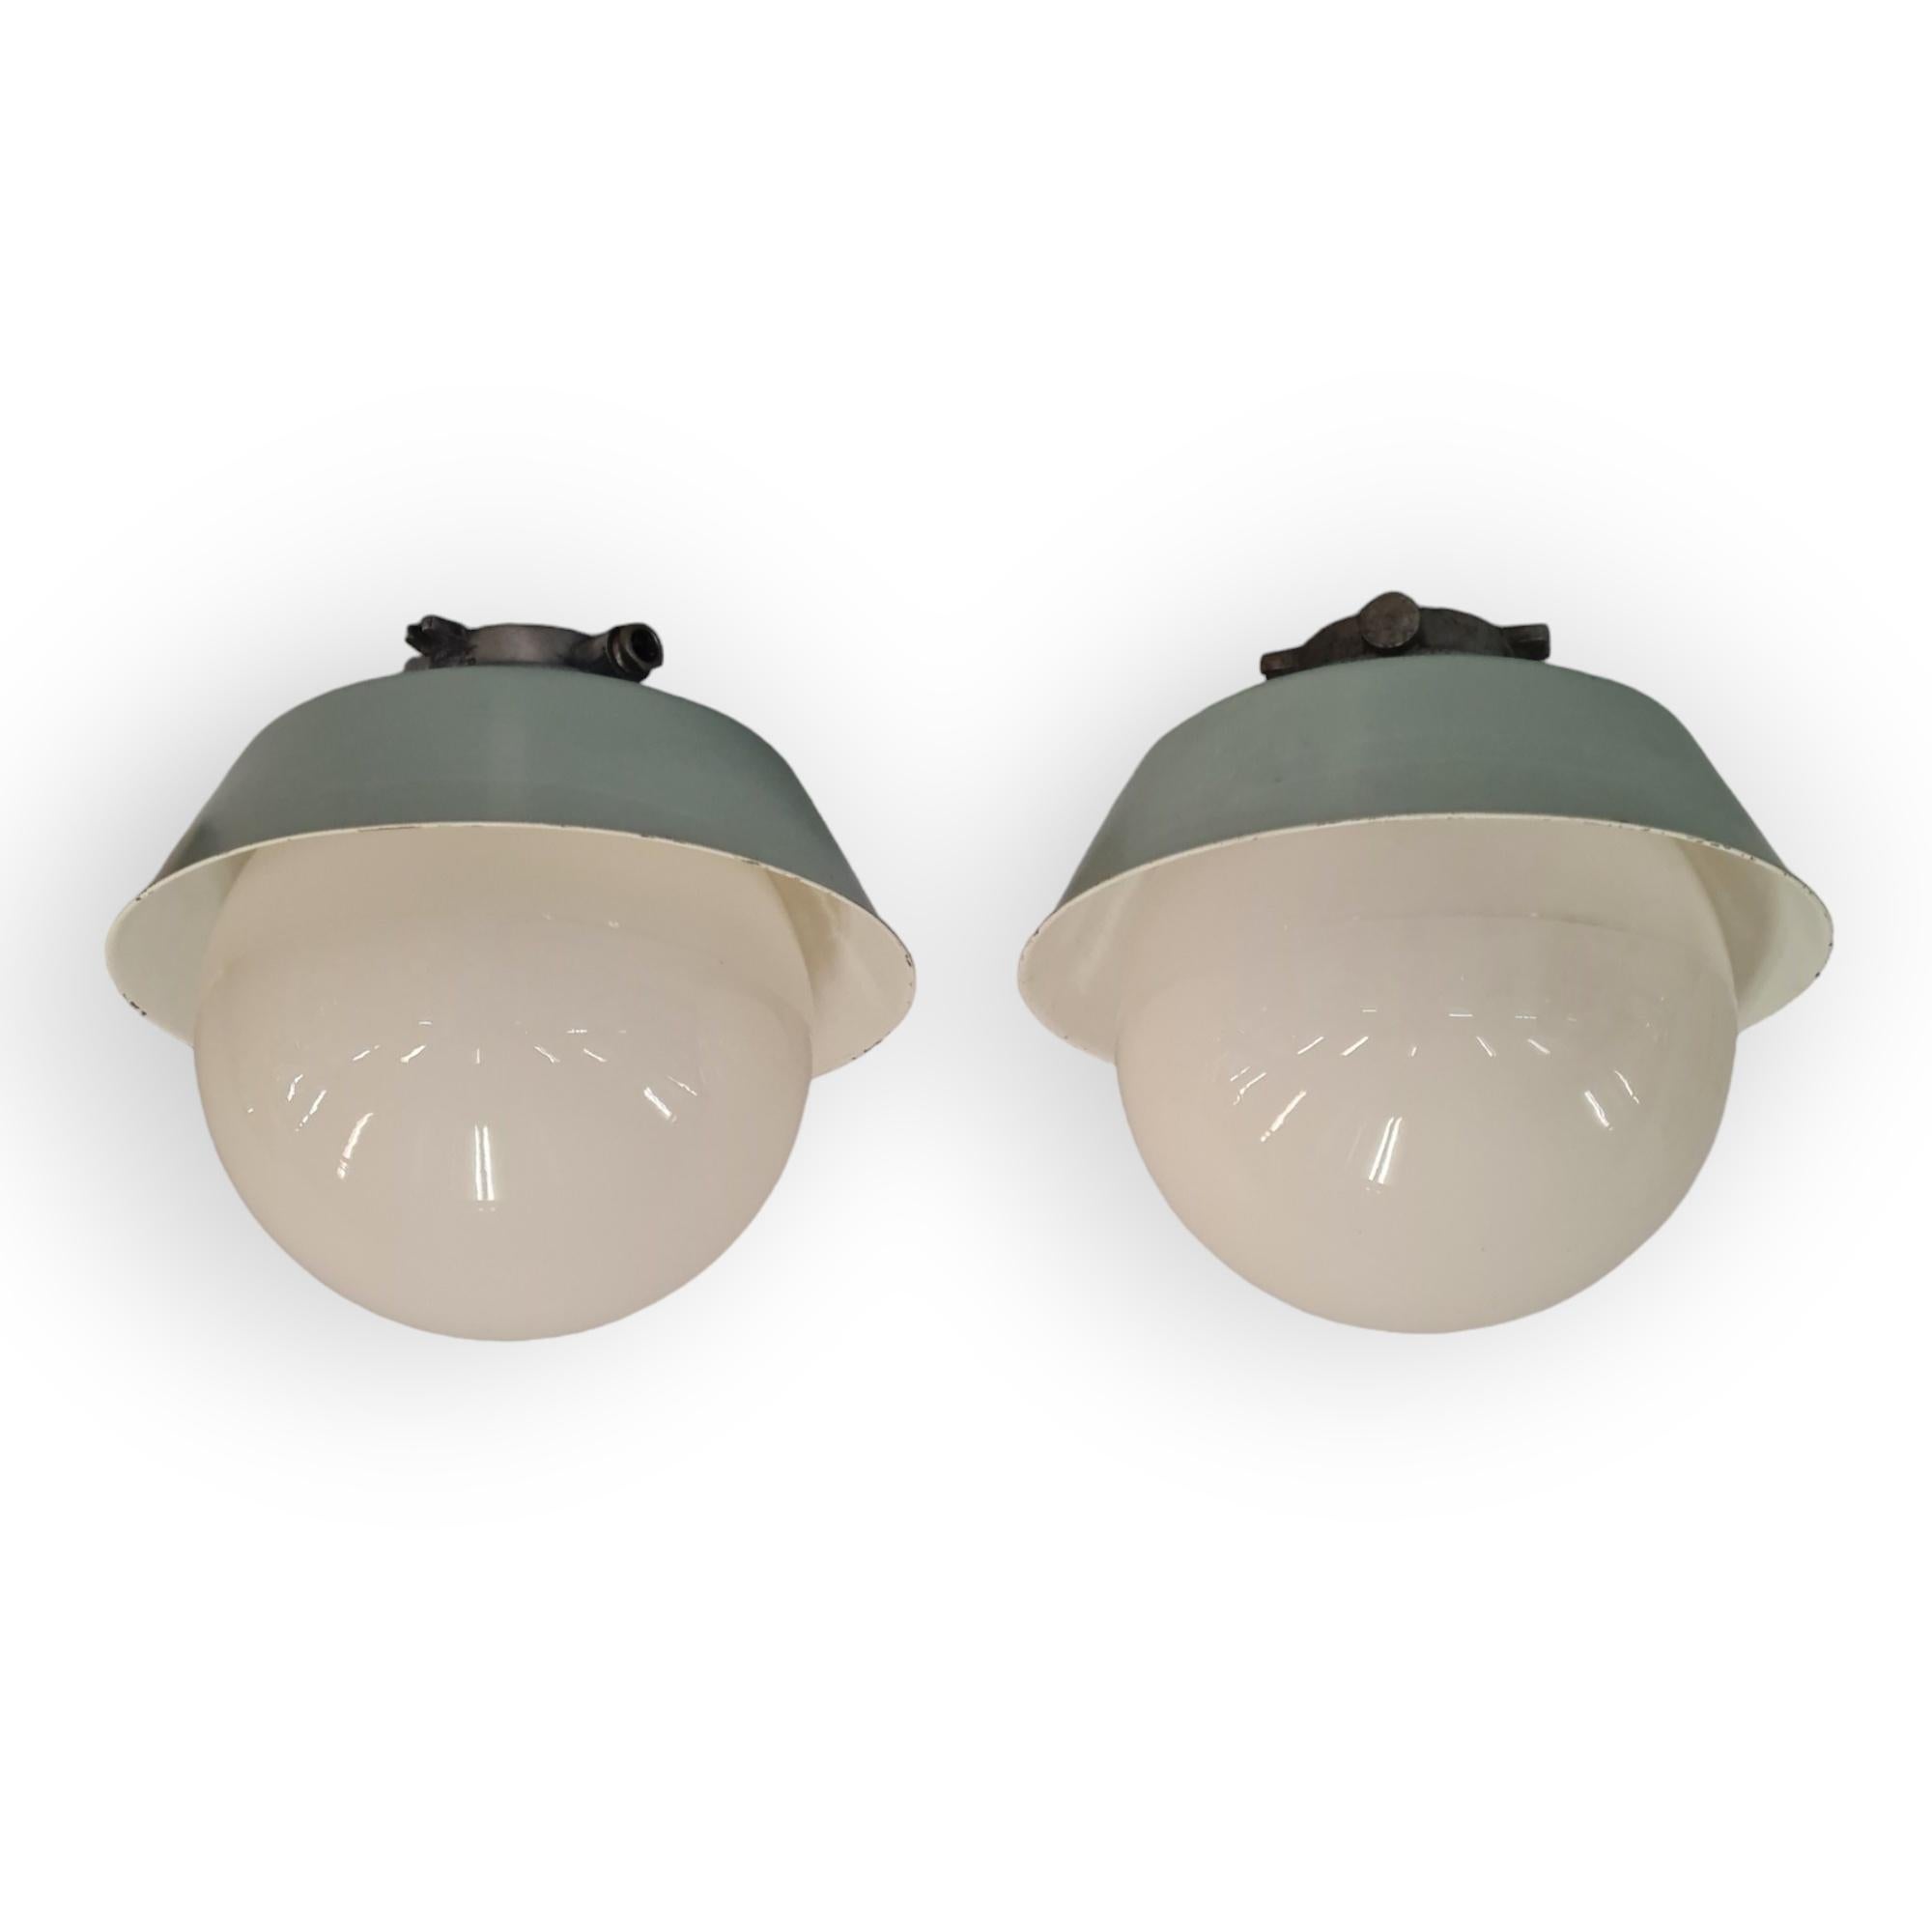 A pair of sizable industrial style Paavo Tynell outdoor / indoor lamps. These lamps model 2421-2453 are quite large with a big opaline glass ball shade that is easily screwed in and out of place to change the light bulb. The lamps have a beautiful